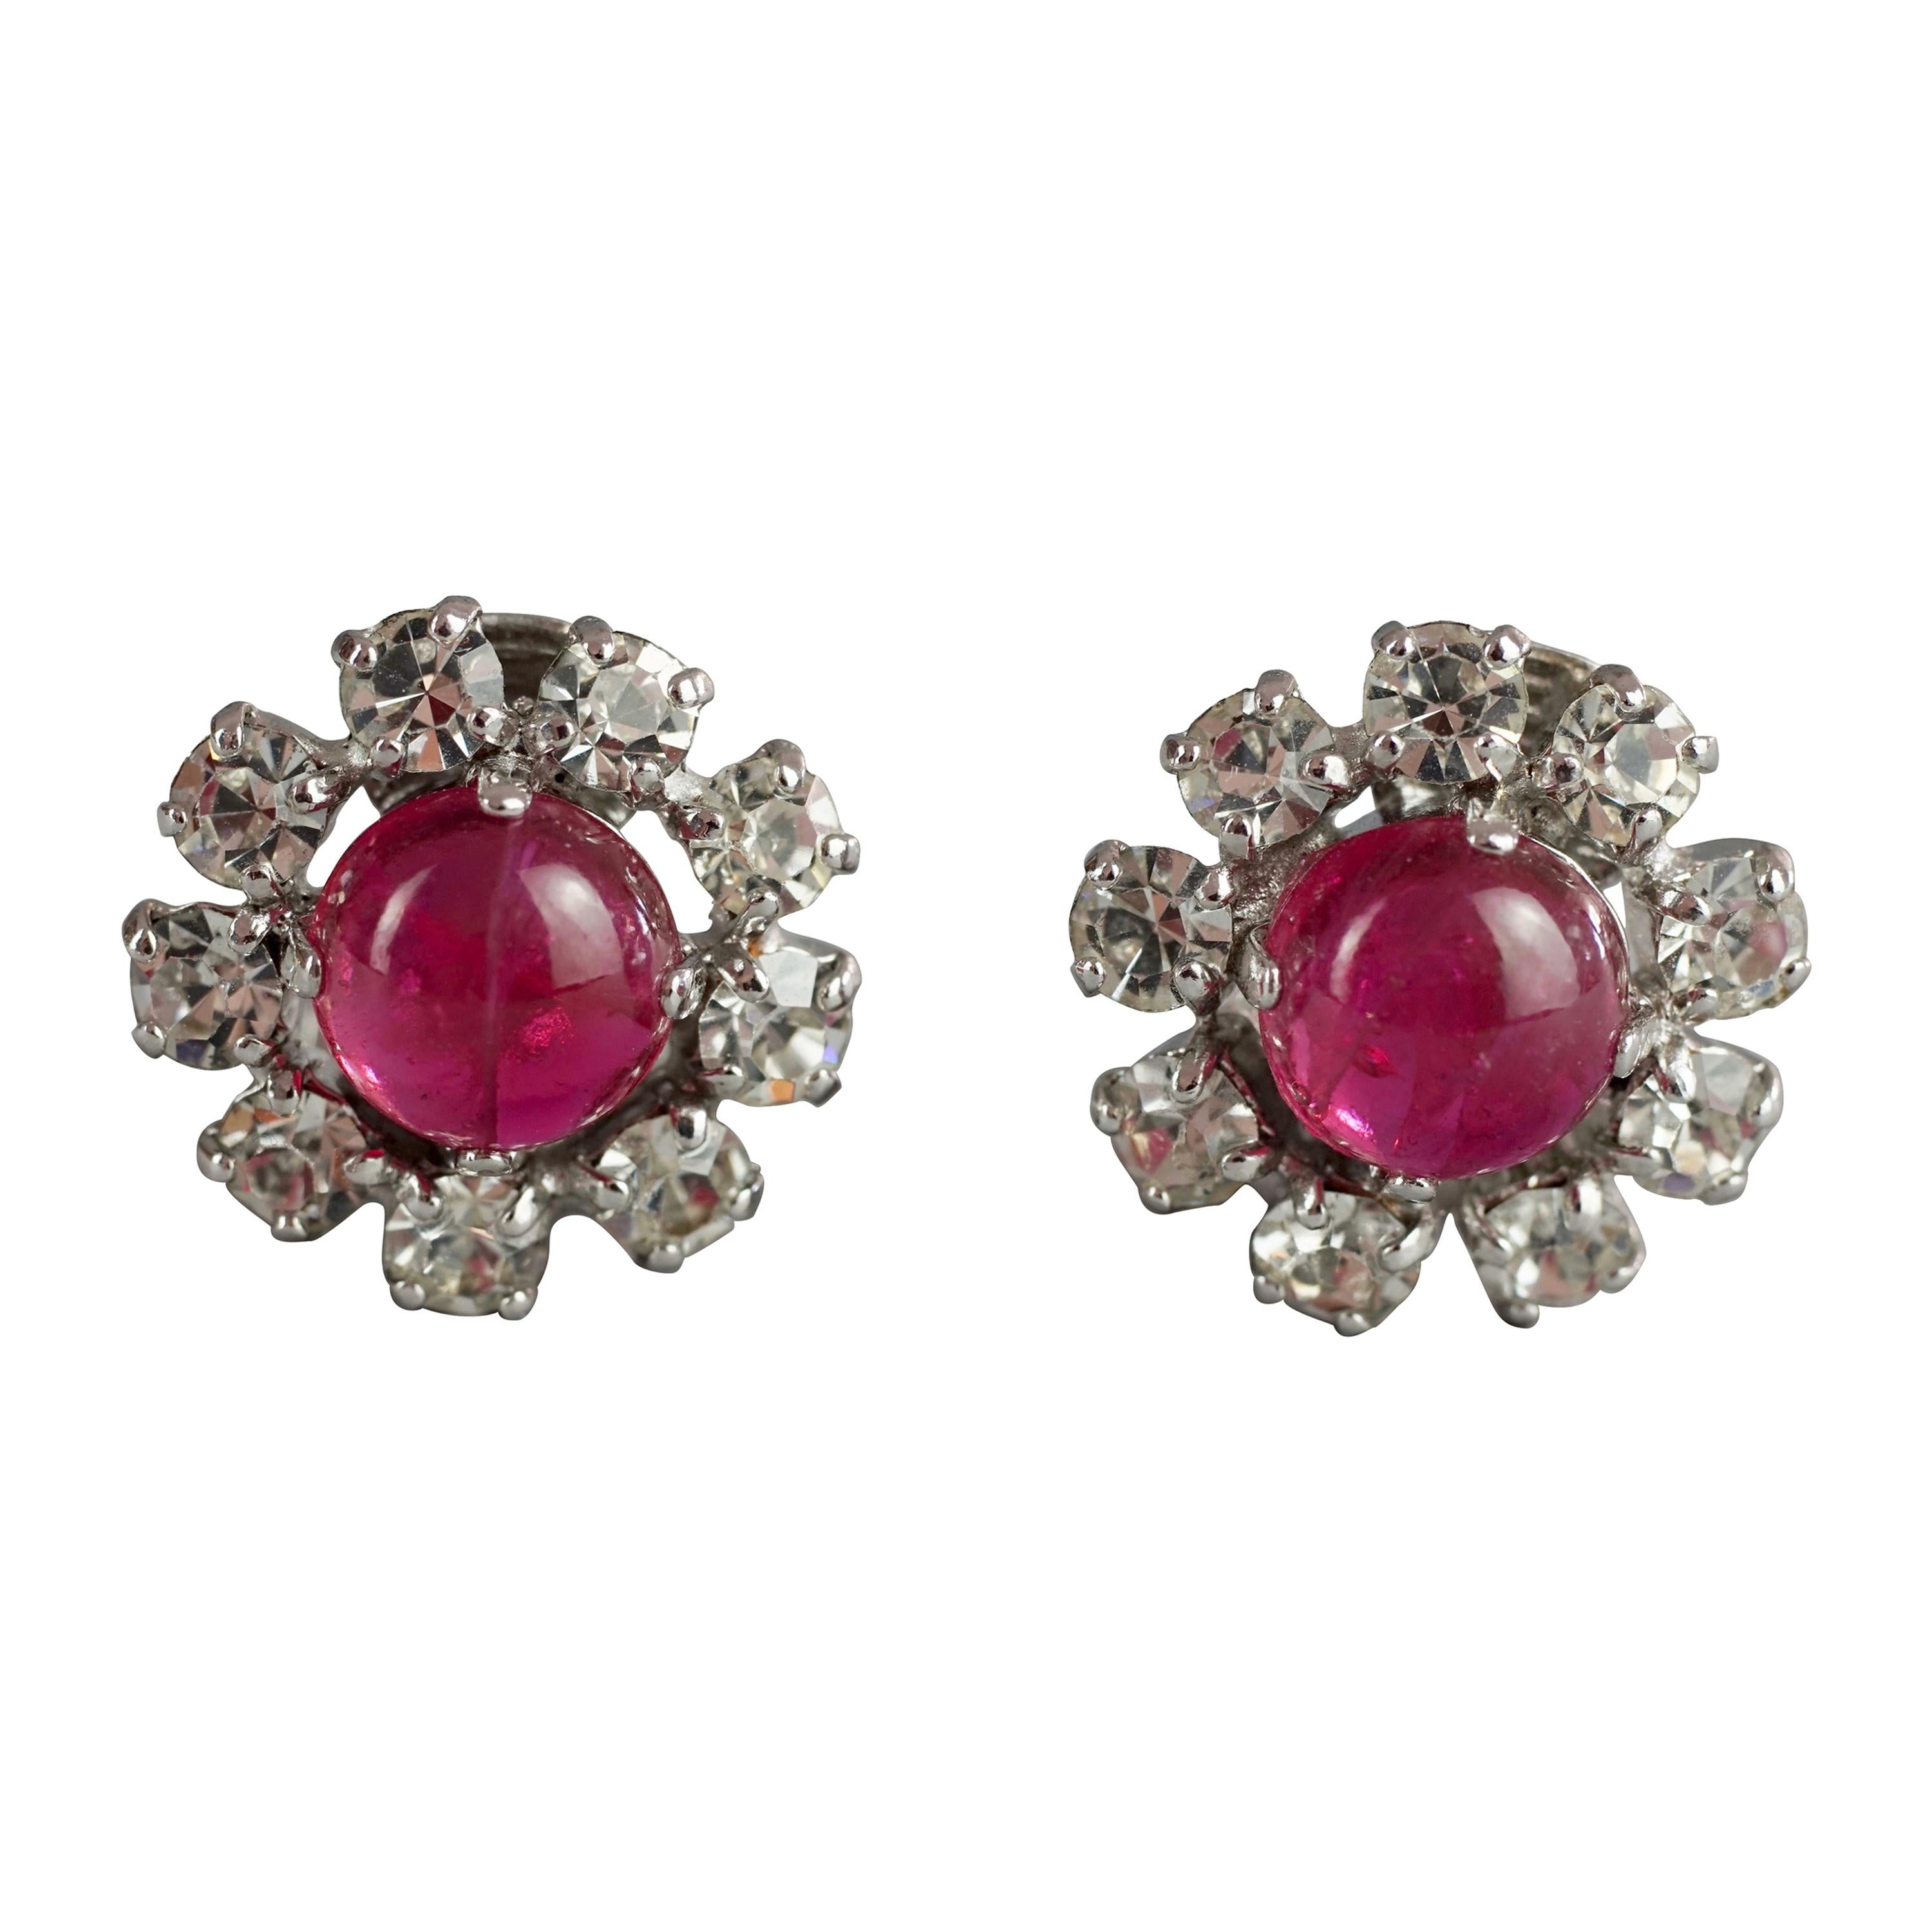 Vintage 1973 CHRISTIAN DIOR Red Glass Cabochon Rhinestone Earrings